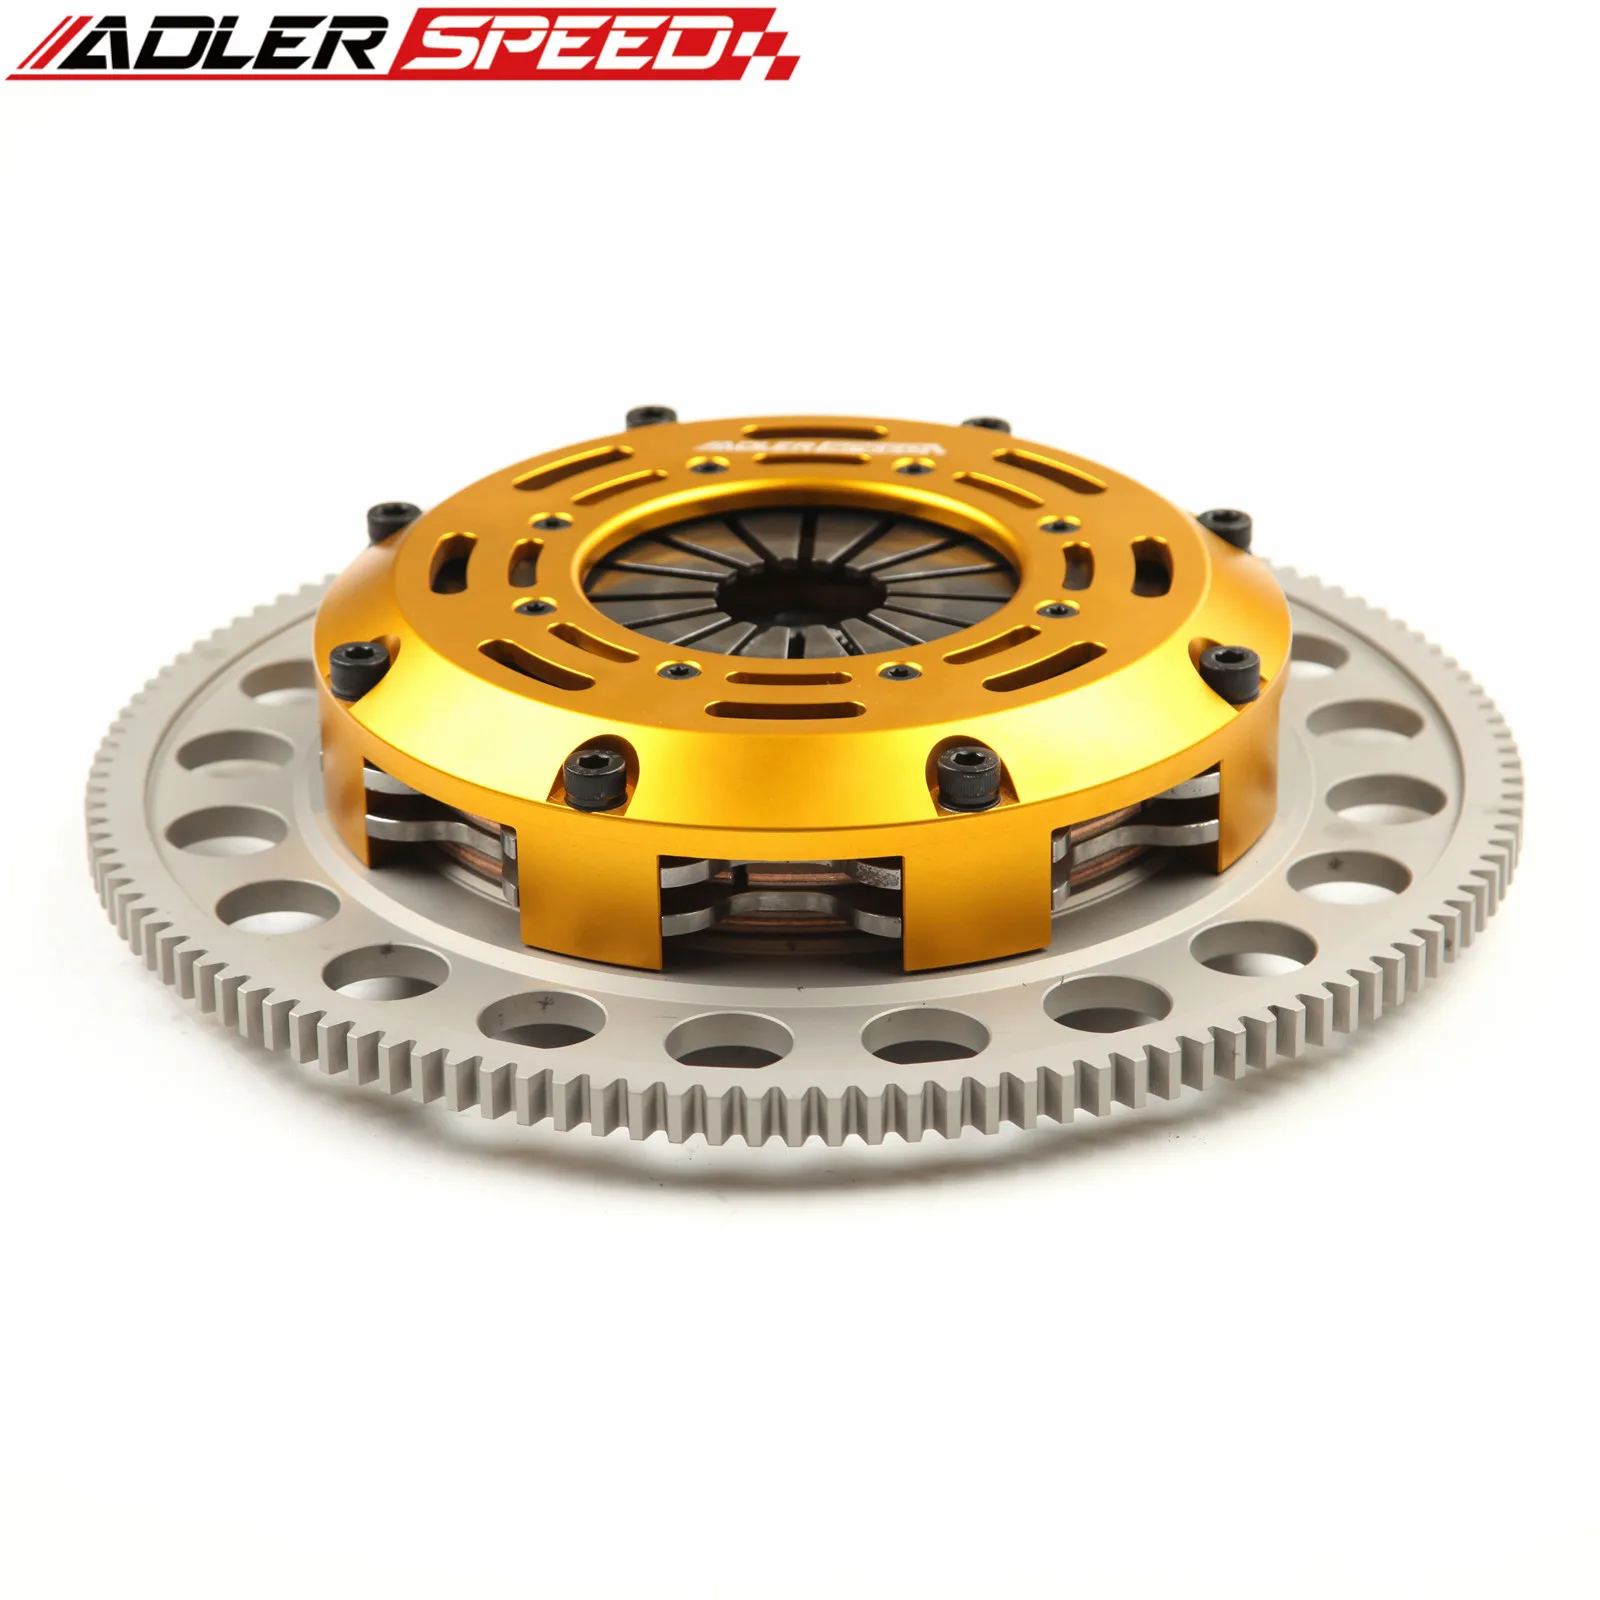 

ADLERSPEED Racing Clutch Twin Disc Kit For 1996 - 2012 Subaru Legacy (2.0L; 2.5L 4cyl Non-Turbo and 3.0L 6cyl) Medium WT